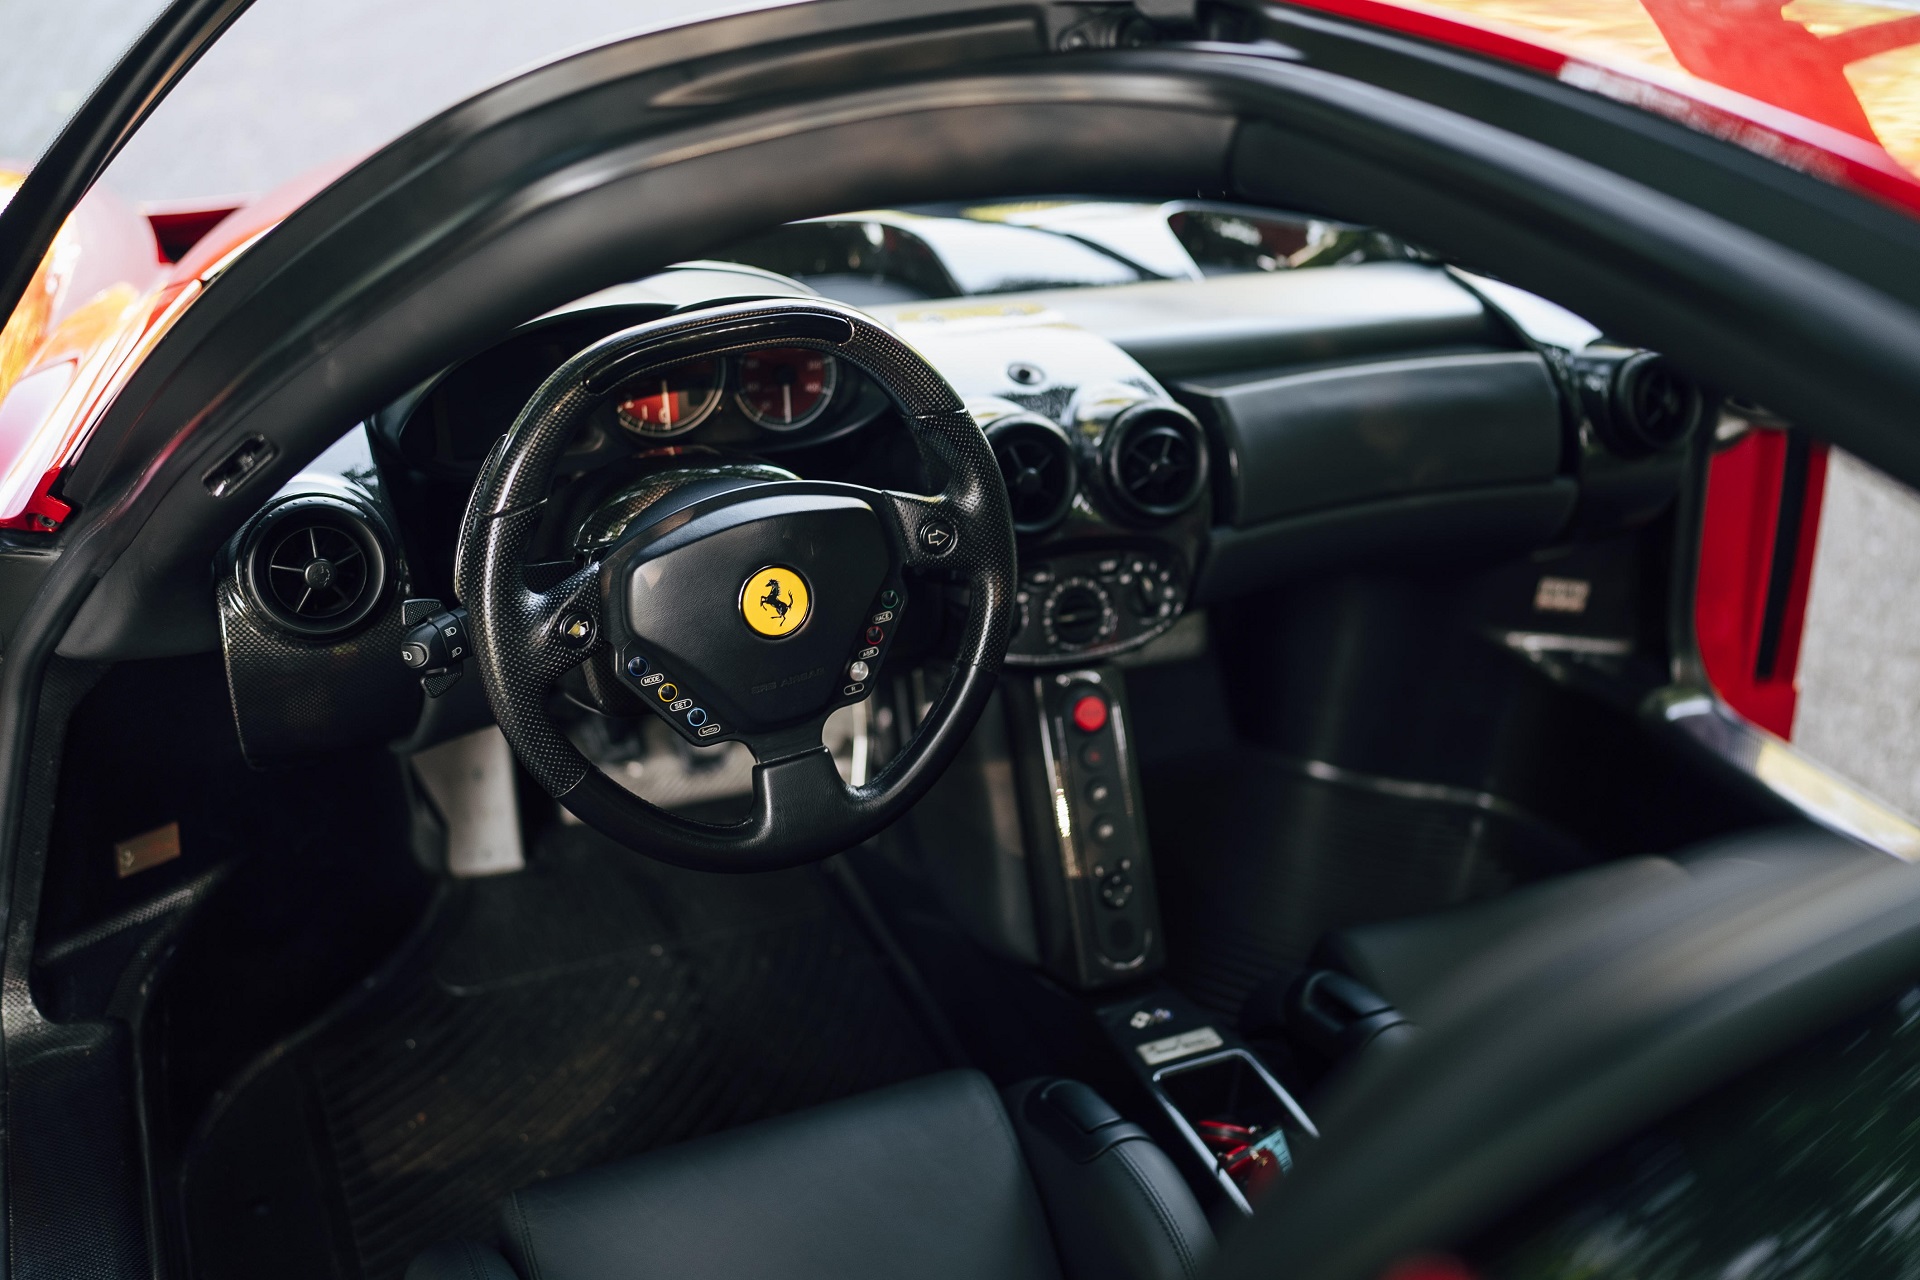 Interior of the red 2003 Ferrari Enzo showing the dashboard.